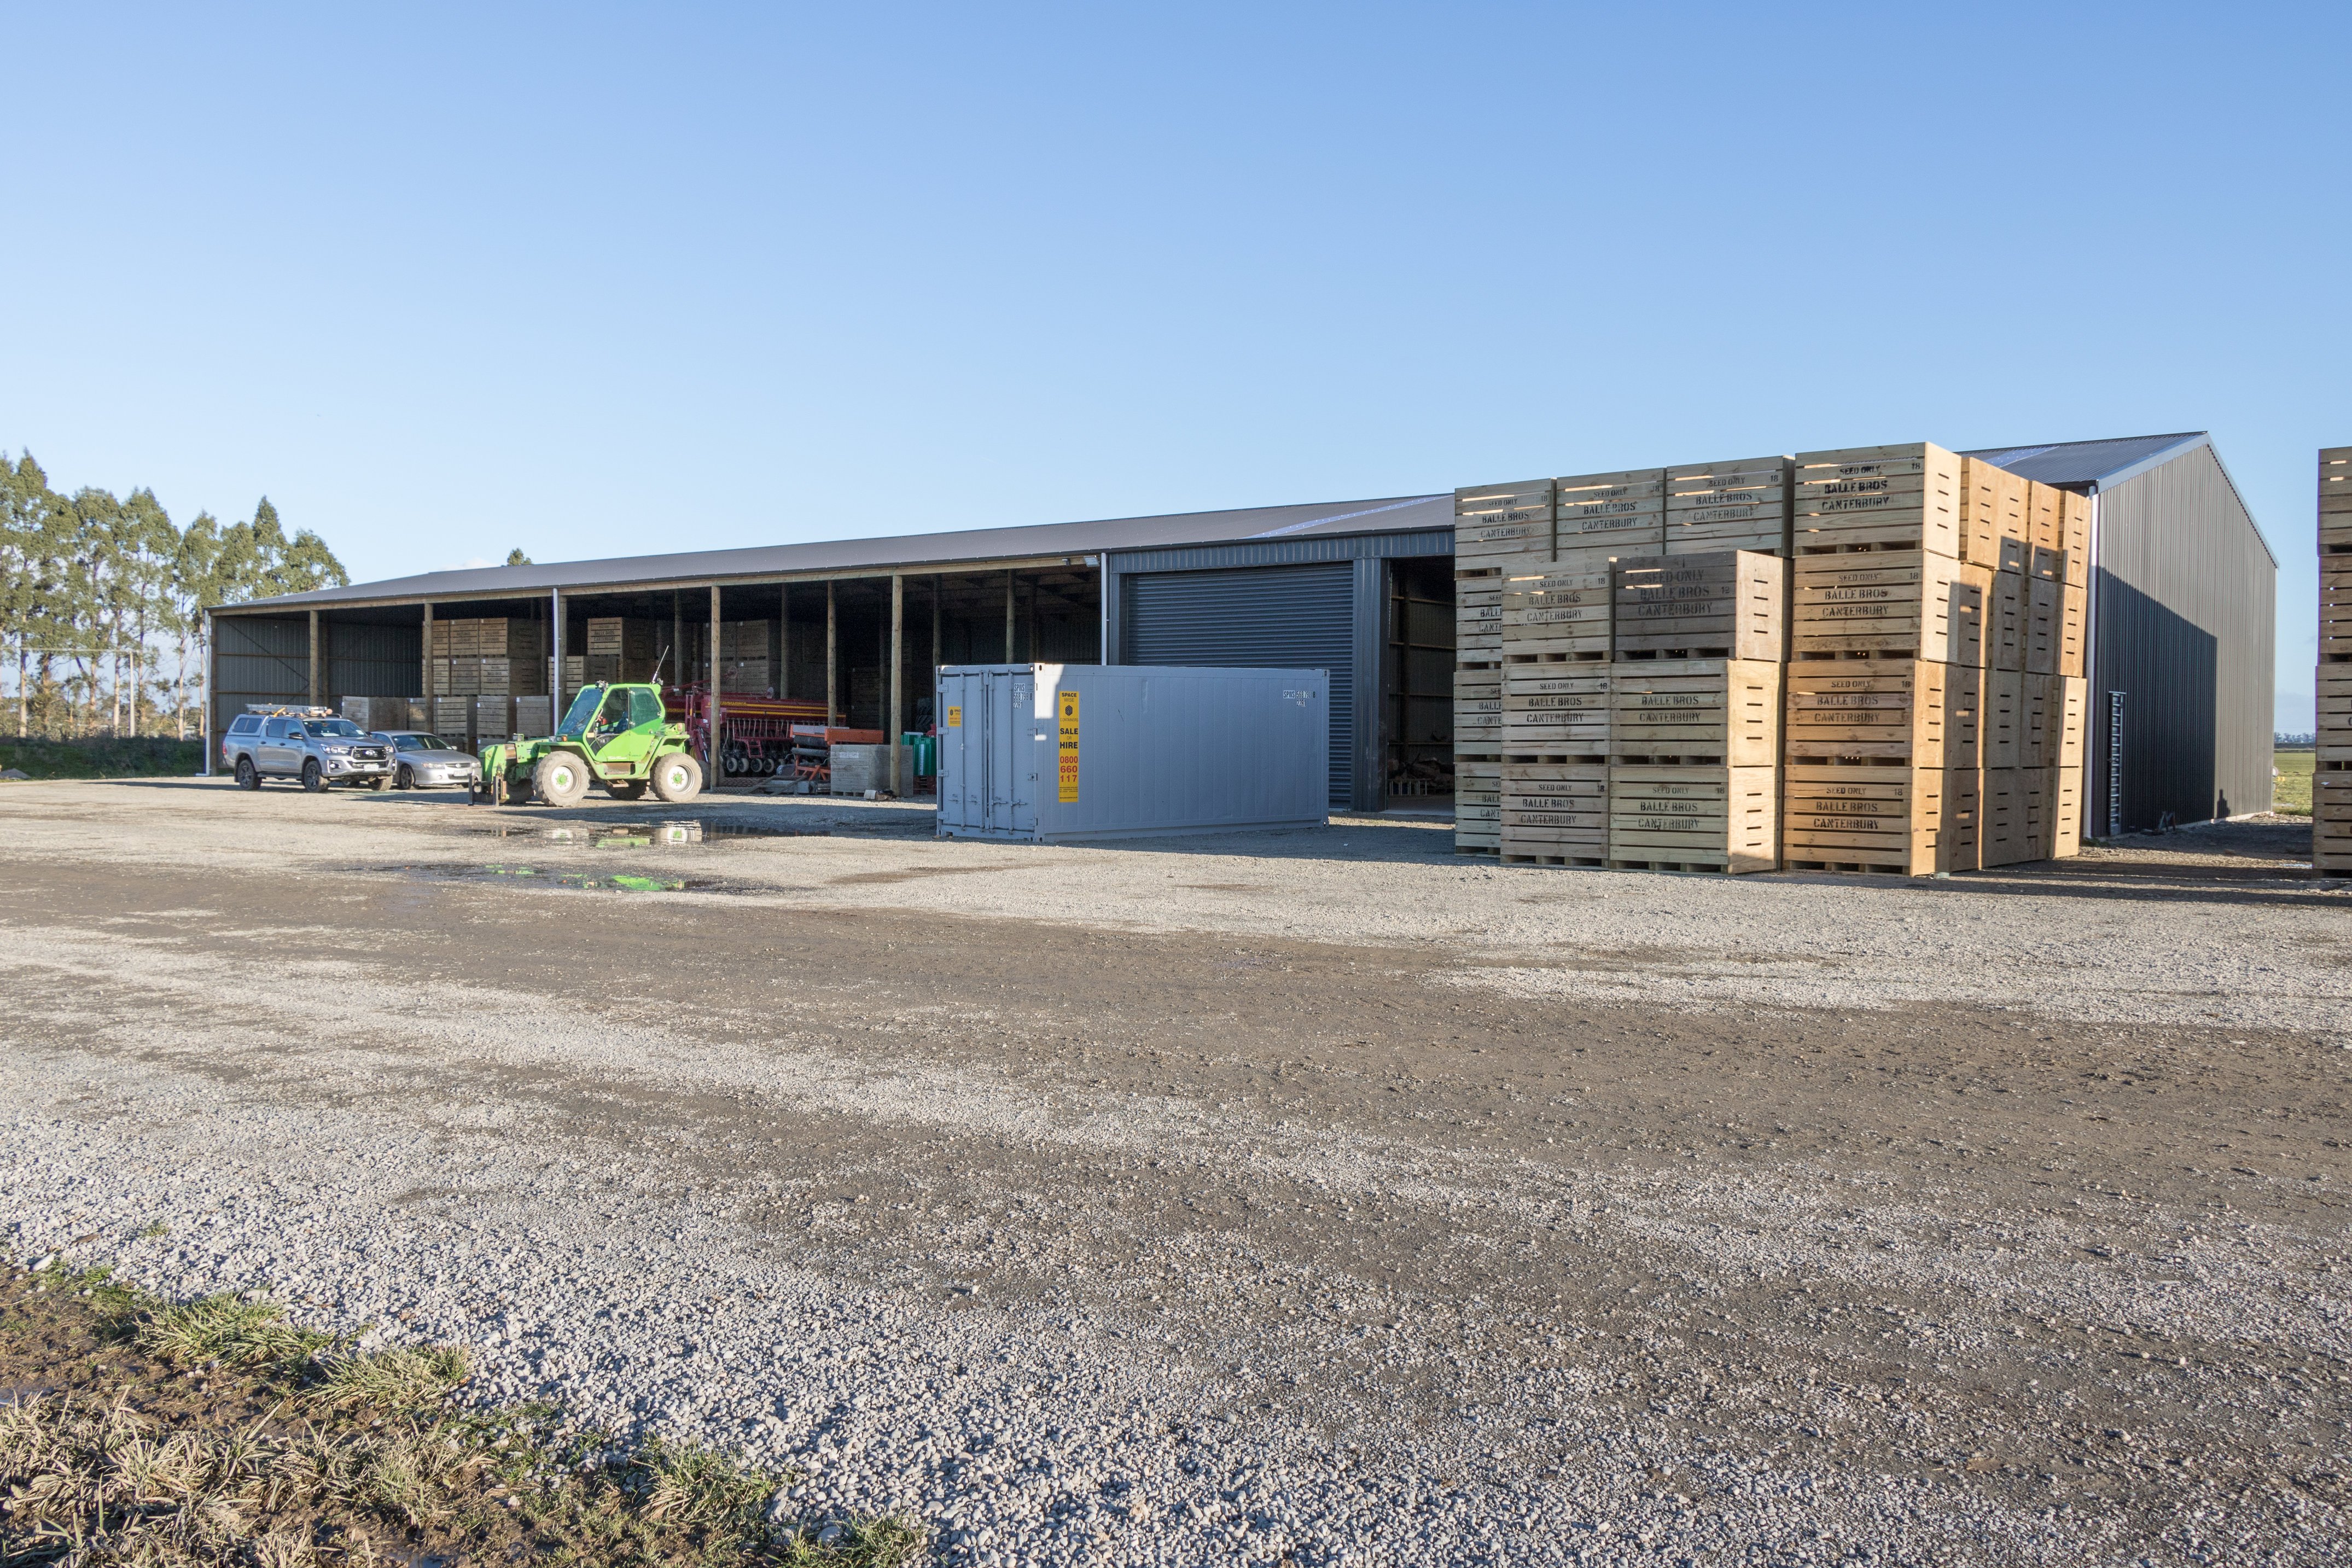 We understand the importance of space and versatility in produce sheds